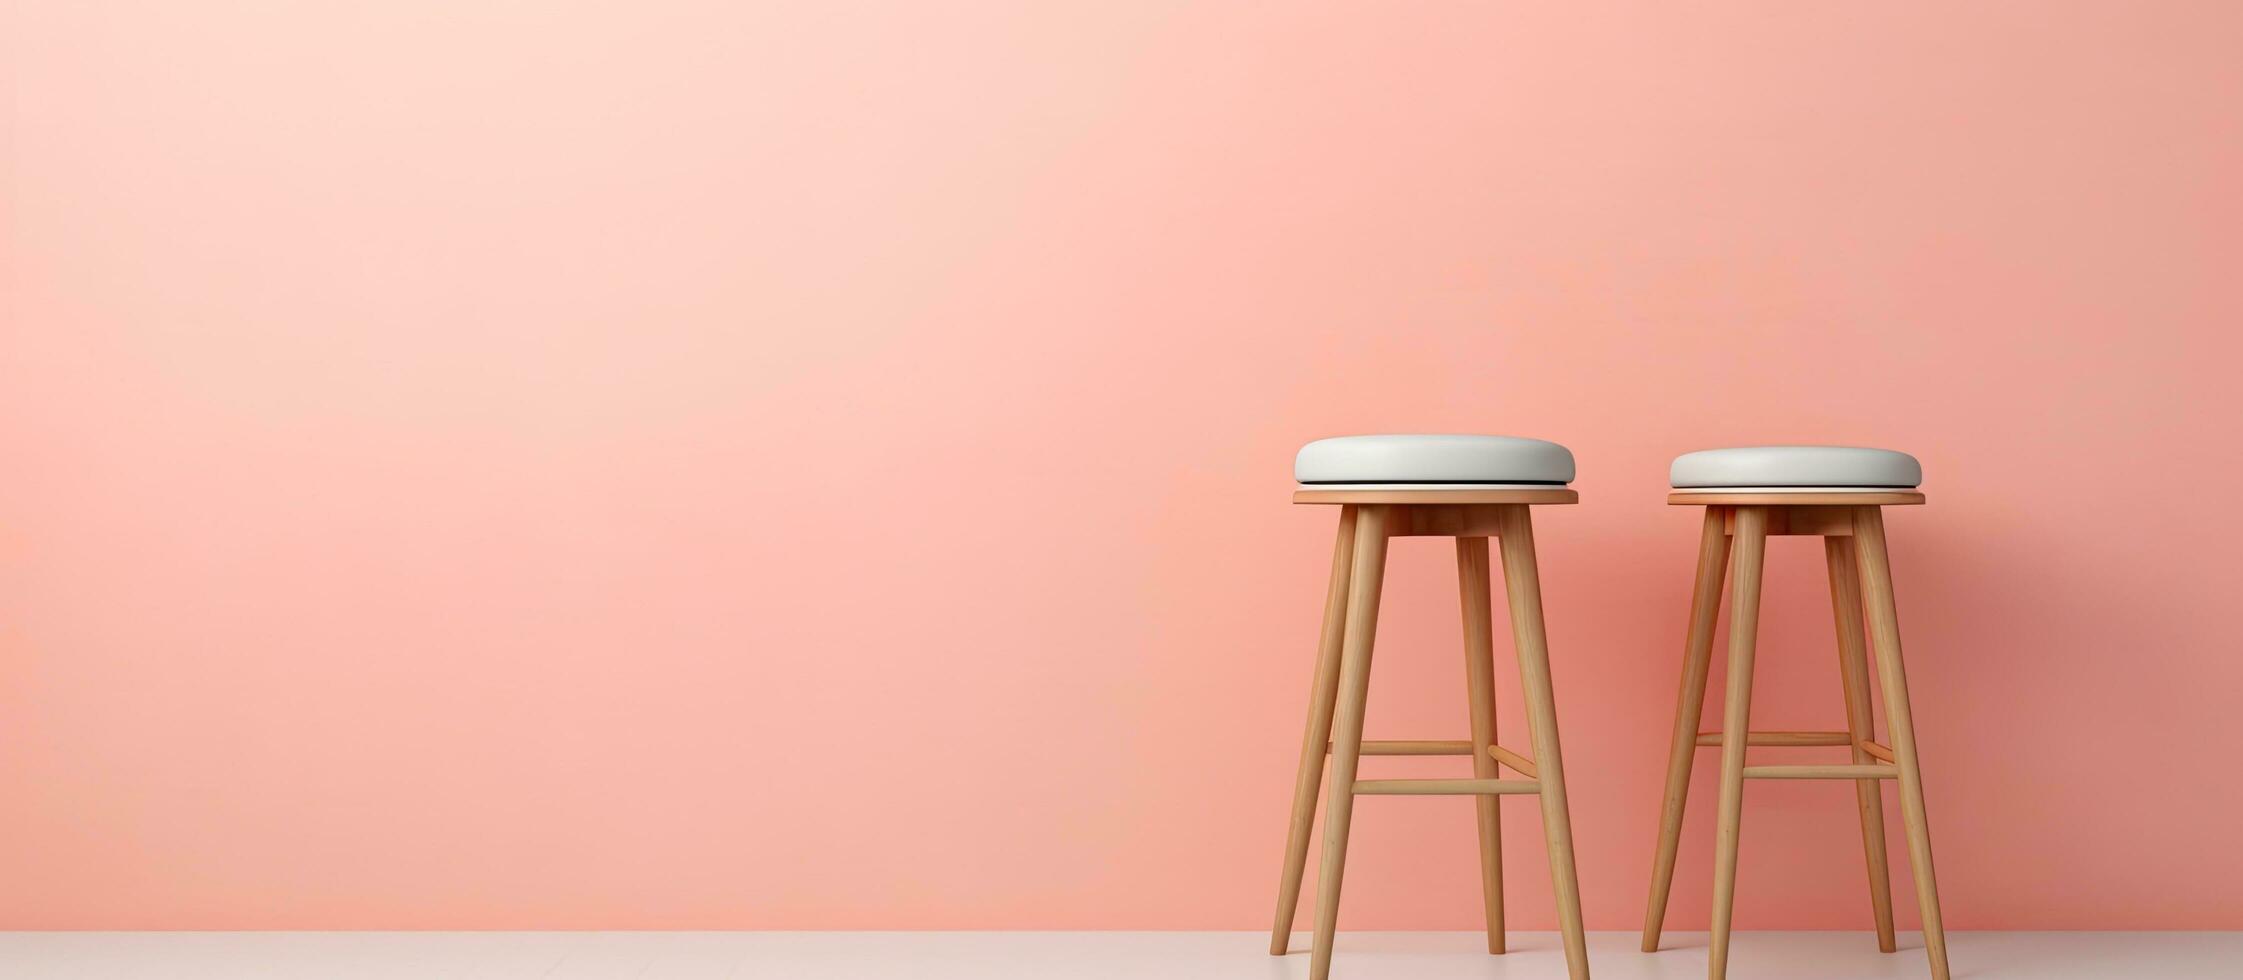 Photo of two stools in front of a pink wall with empty space for creativity with copy space